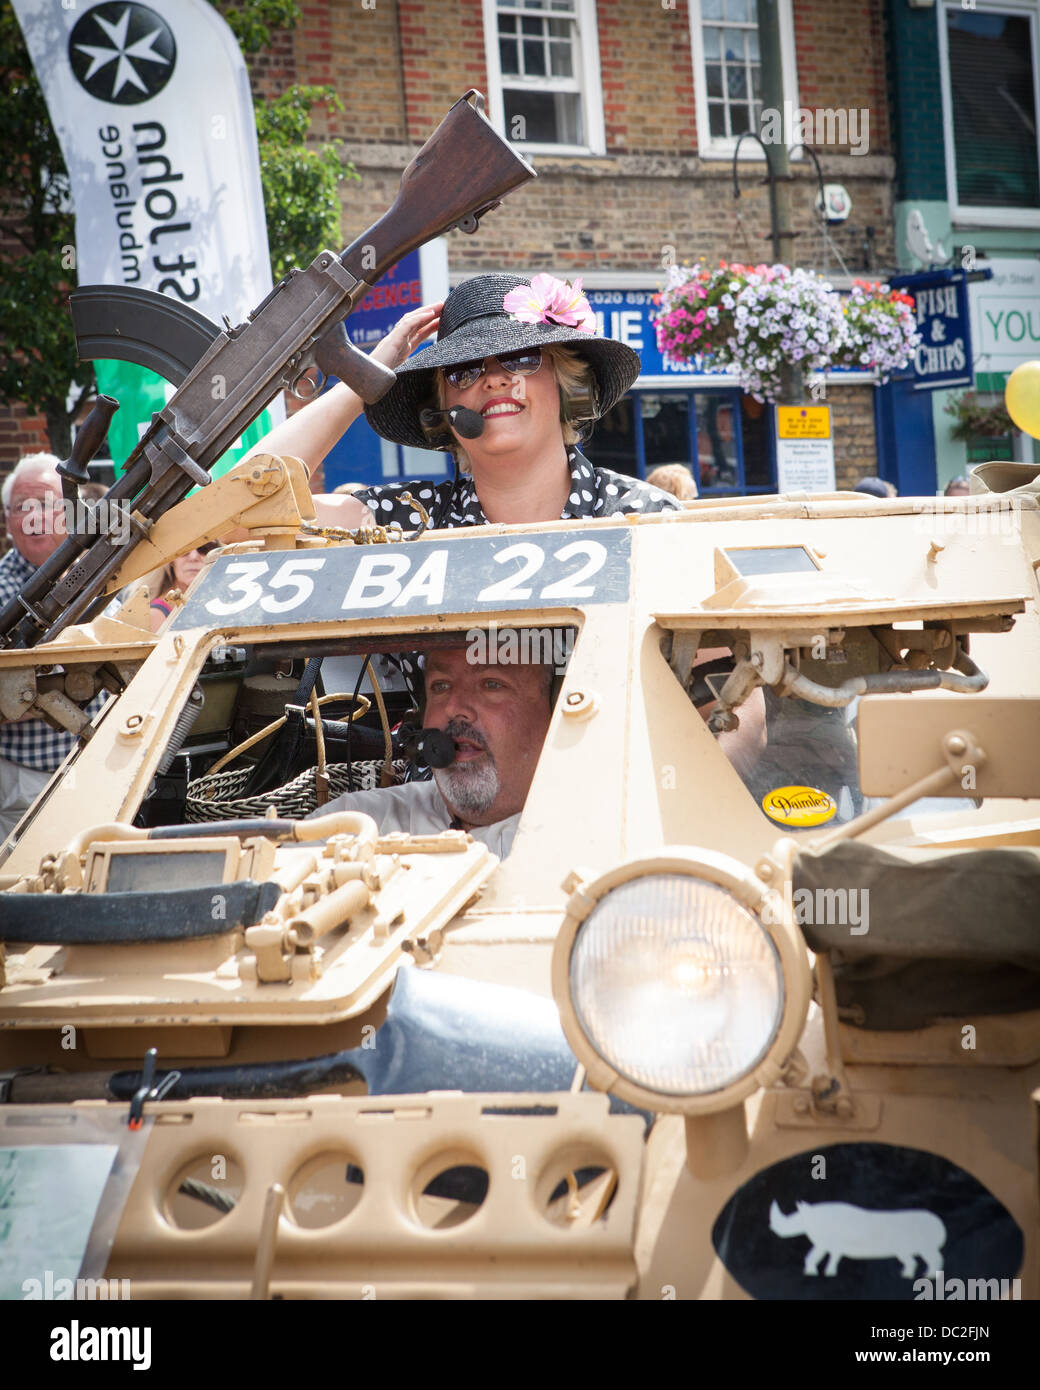 Hampton Wick Festival 2013 - tanks, boats and all kinds of vehicles exhibit during this eccentric and fun event. Stock Photo